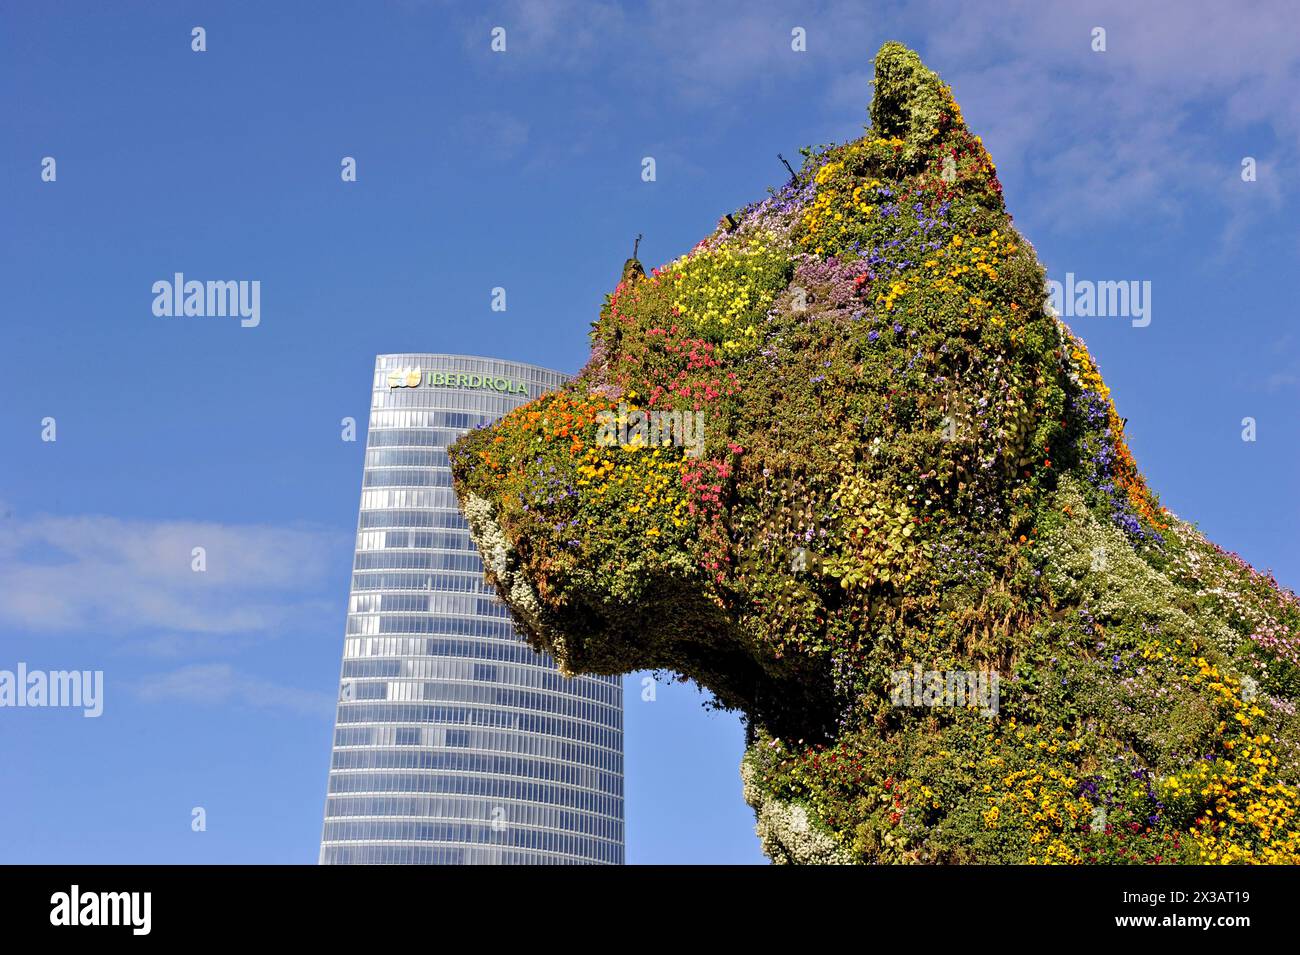 Giant outdoor artwork by Jeff Koons at the Guggenheim Bilbao Museum in Spain, Europe Stock Photo